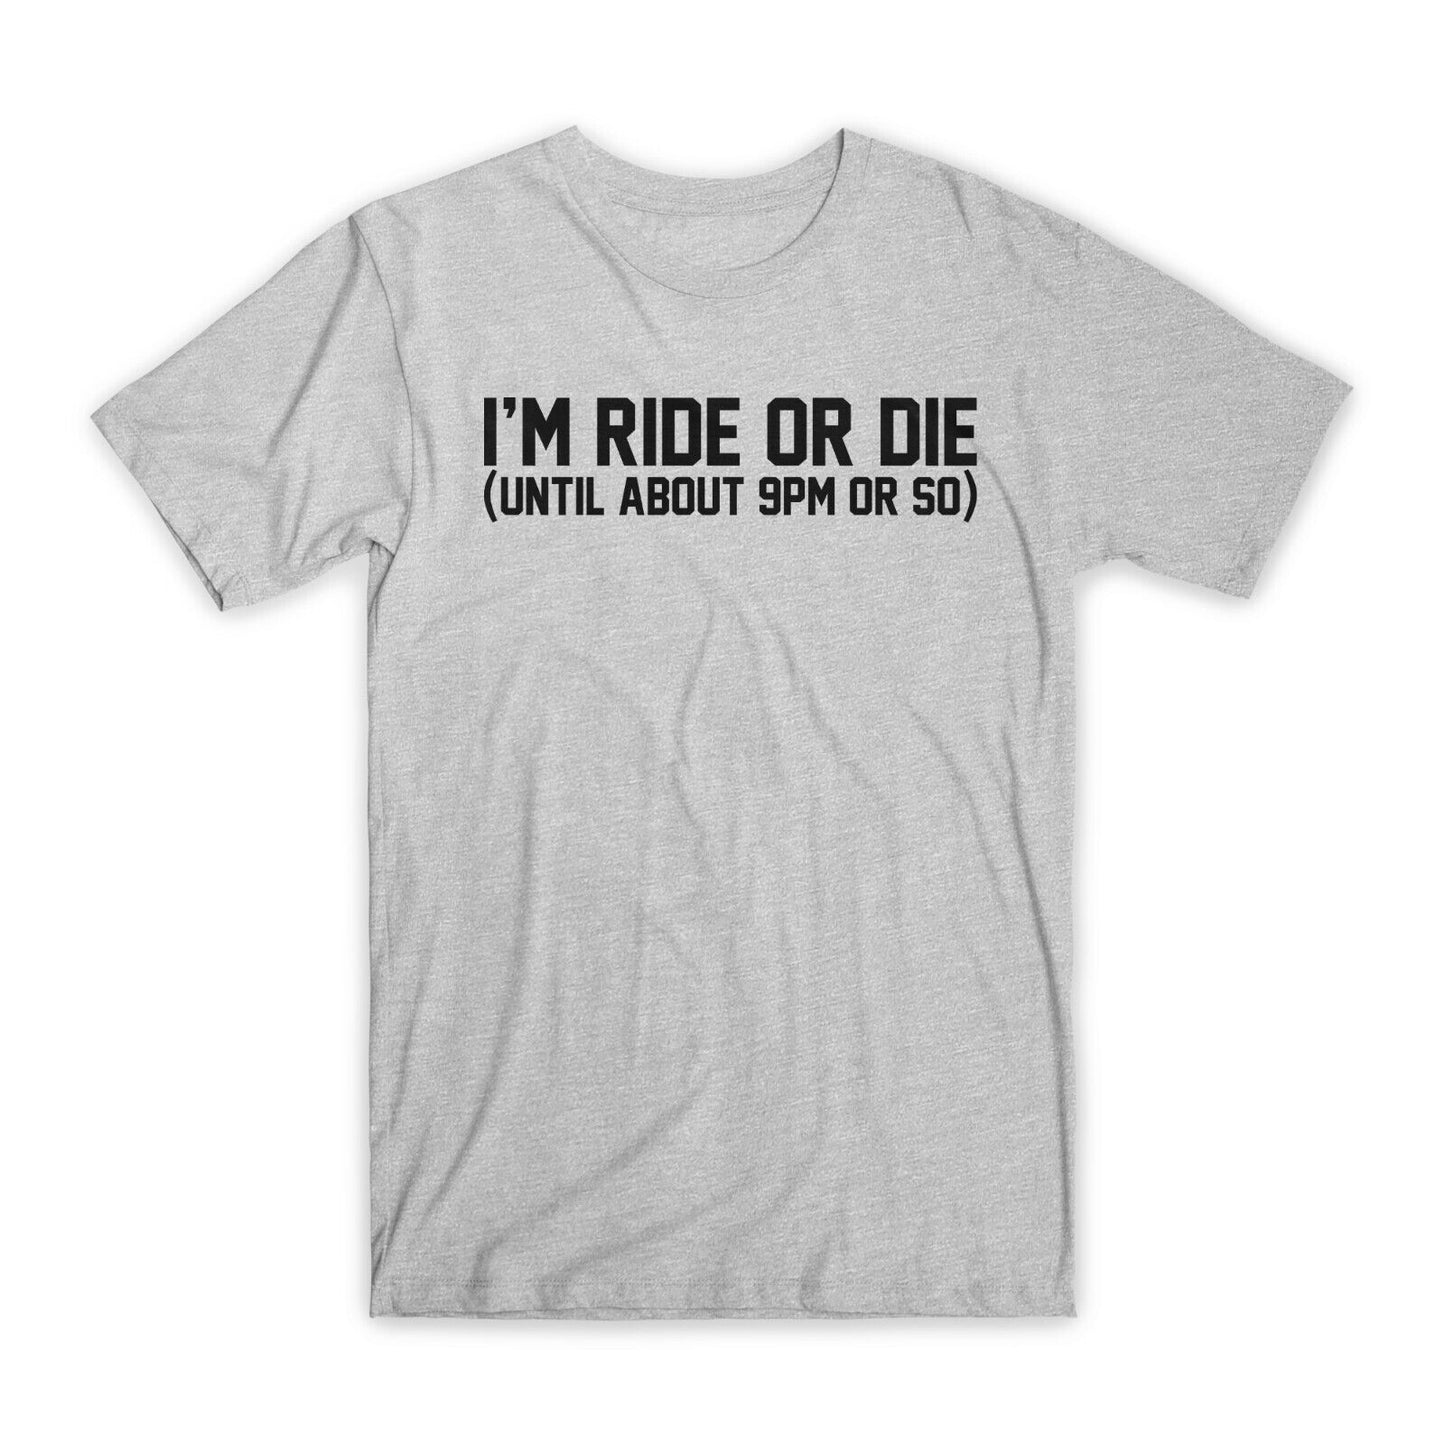 I'm Ride or Die T-Shirt Premium Soft Cotton Crew Neck Funny Tee Novelty Gift NEW